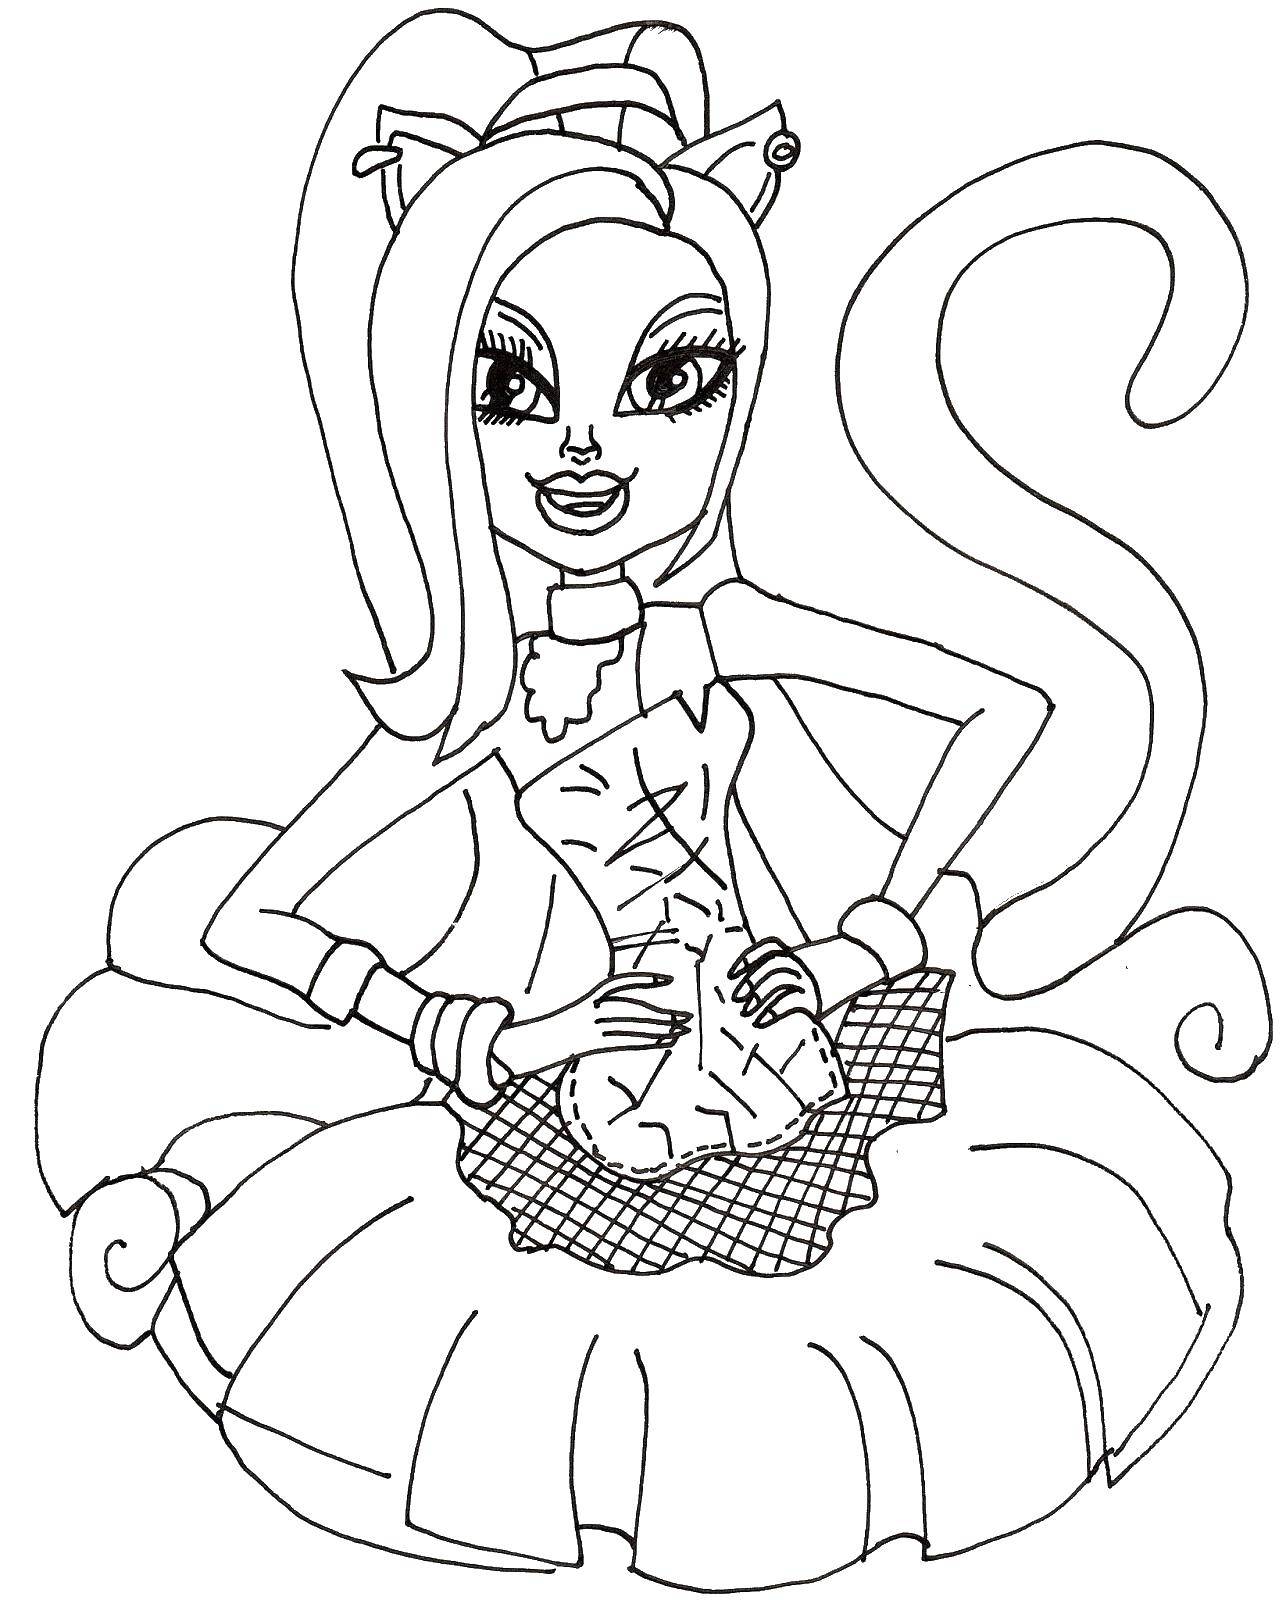 Coloring Toralei stripe baby from a cat werewolf. Category Monster high. Tags:  Toralei Stripe, Monster high.